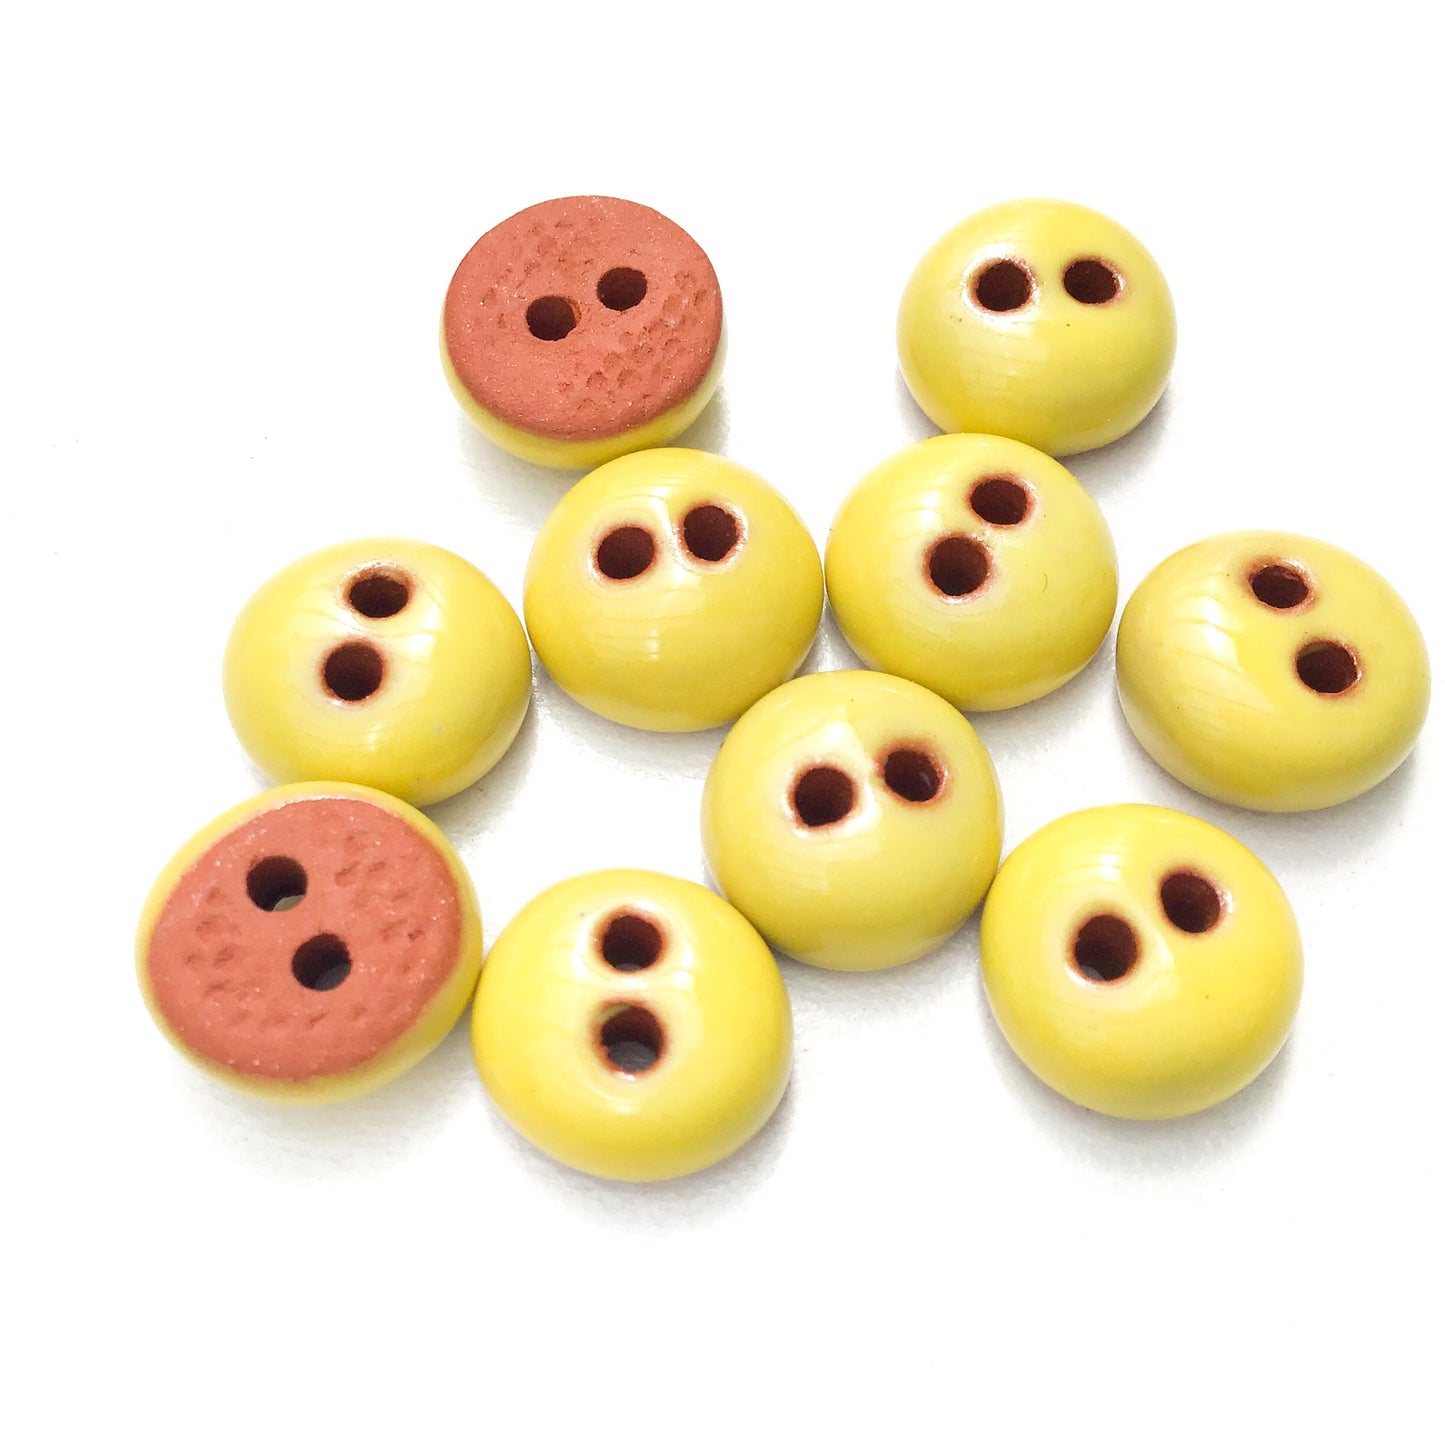 Chartreuse Ceramic Buttons - Hand Made Clay Buttons - 7/16" - 10 Pack